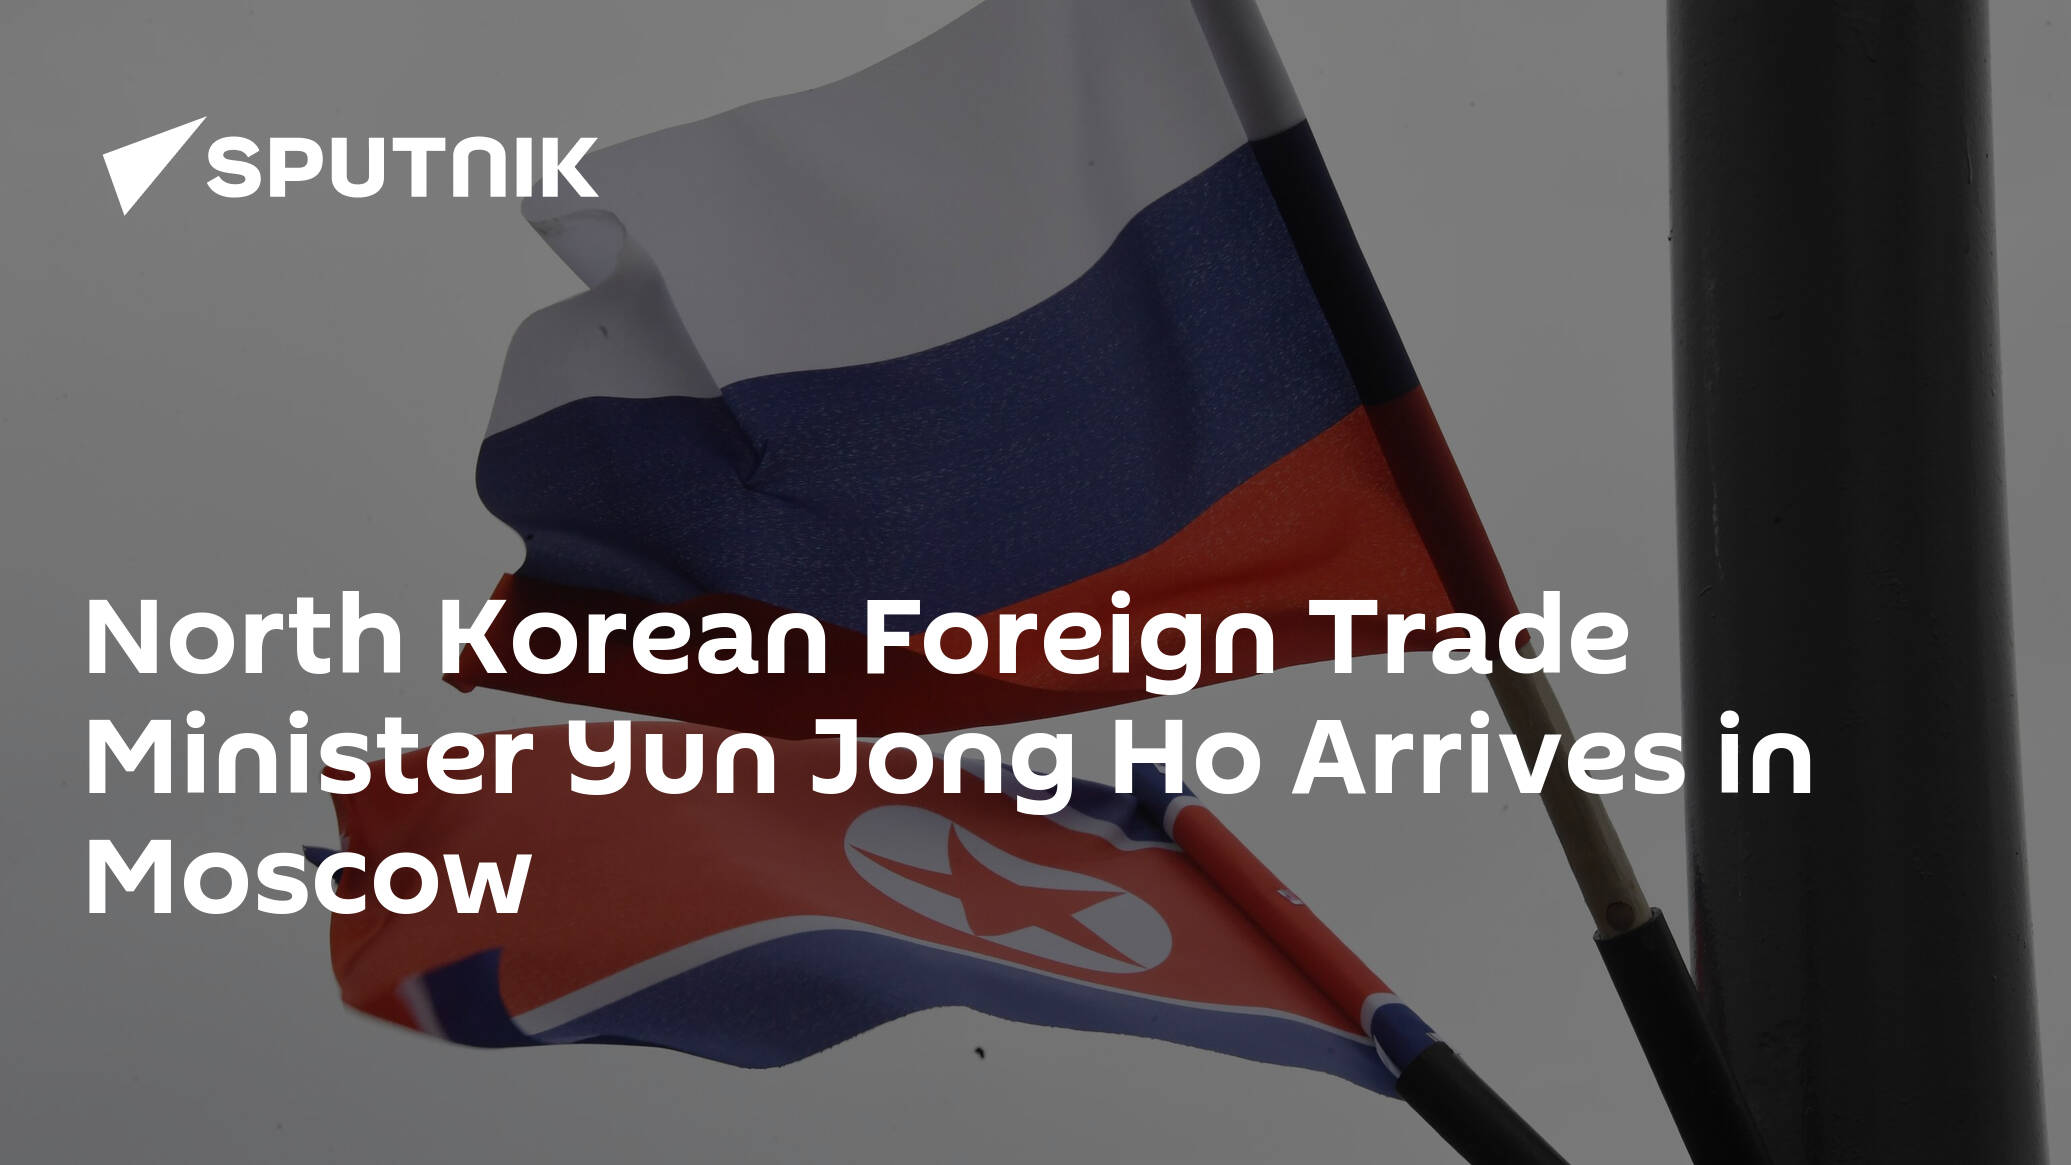 North Korean Foreign Trade Minister Yun Jong Ho Arrives in Moscow